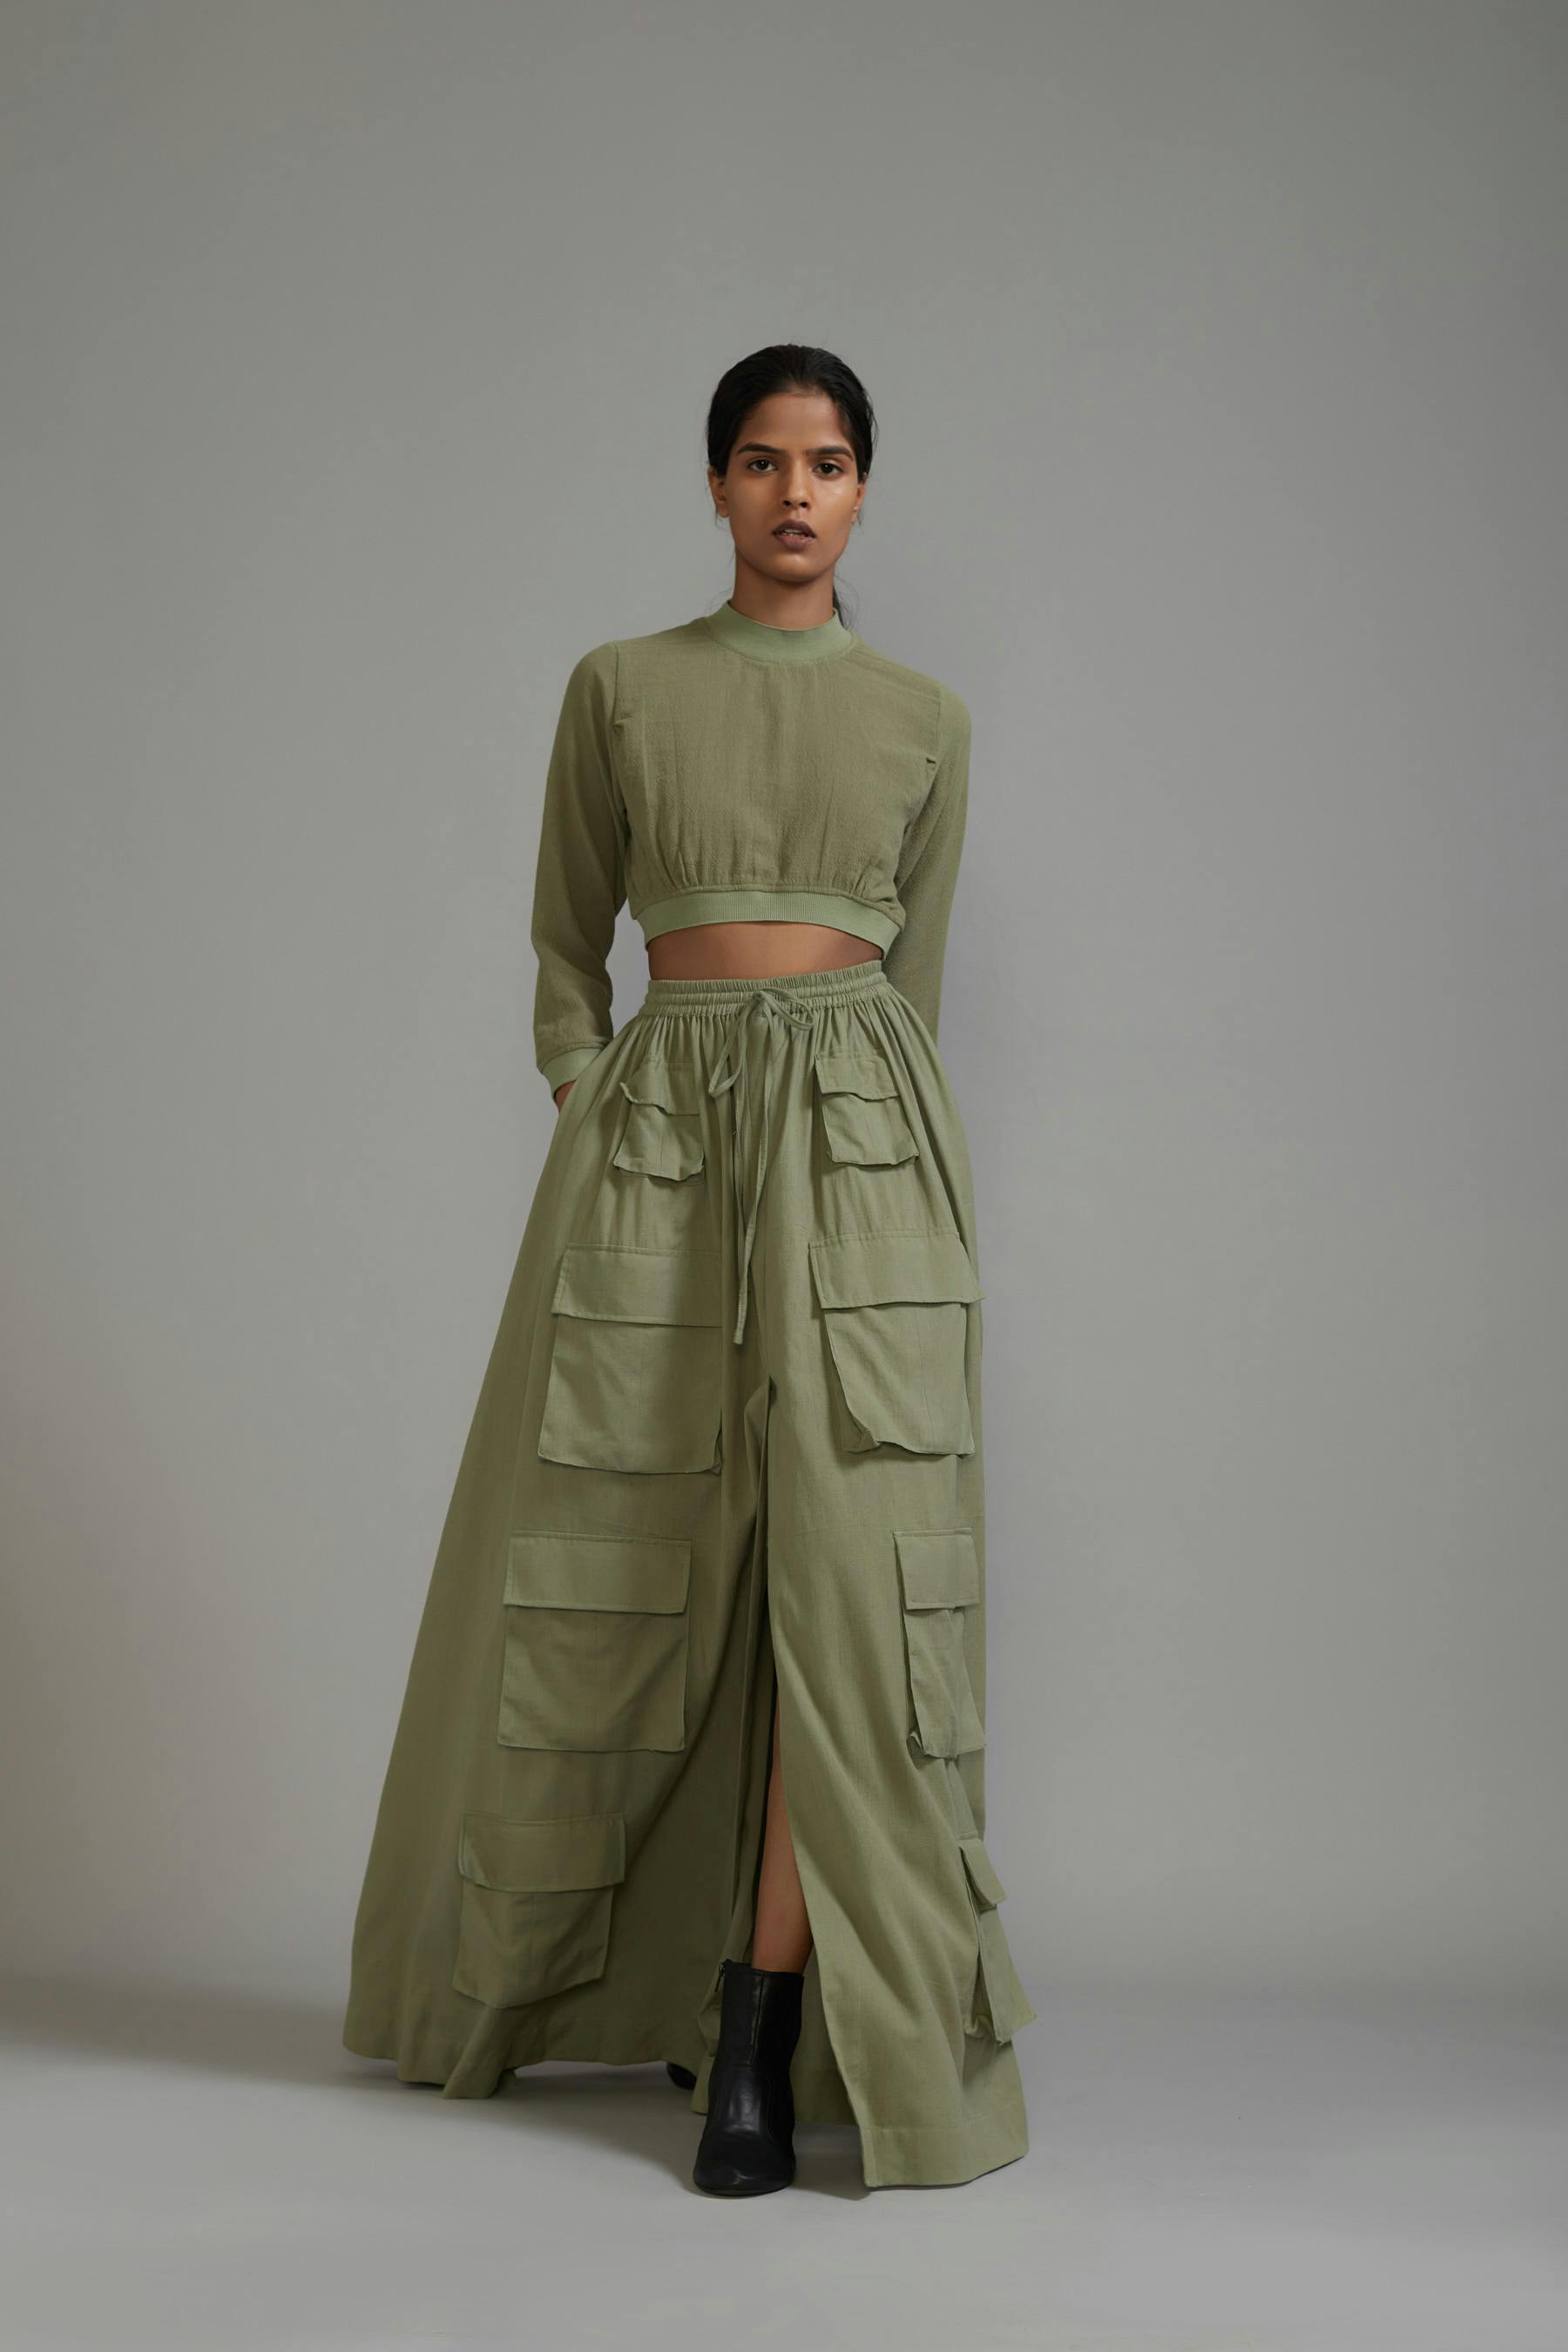 Thumbnail preview #0 for Green Crop Top and Cargo Skirt Set